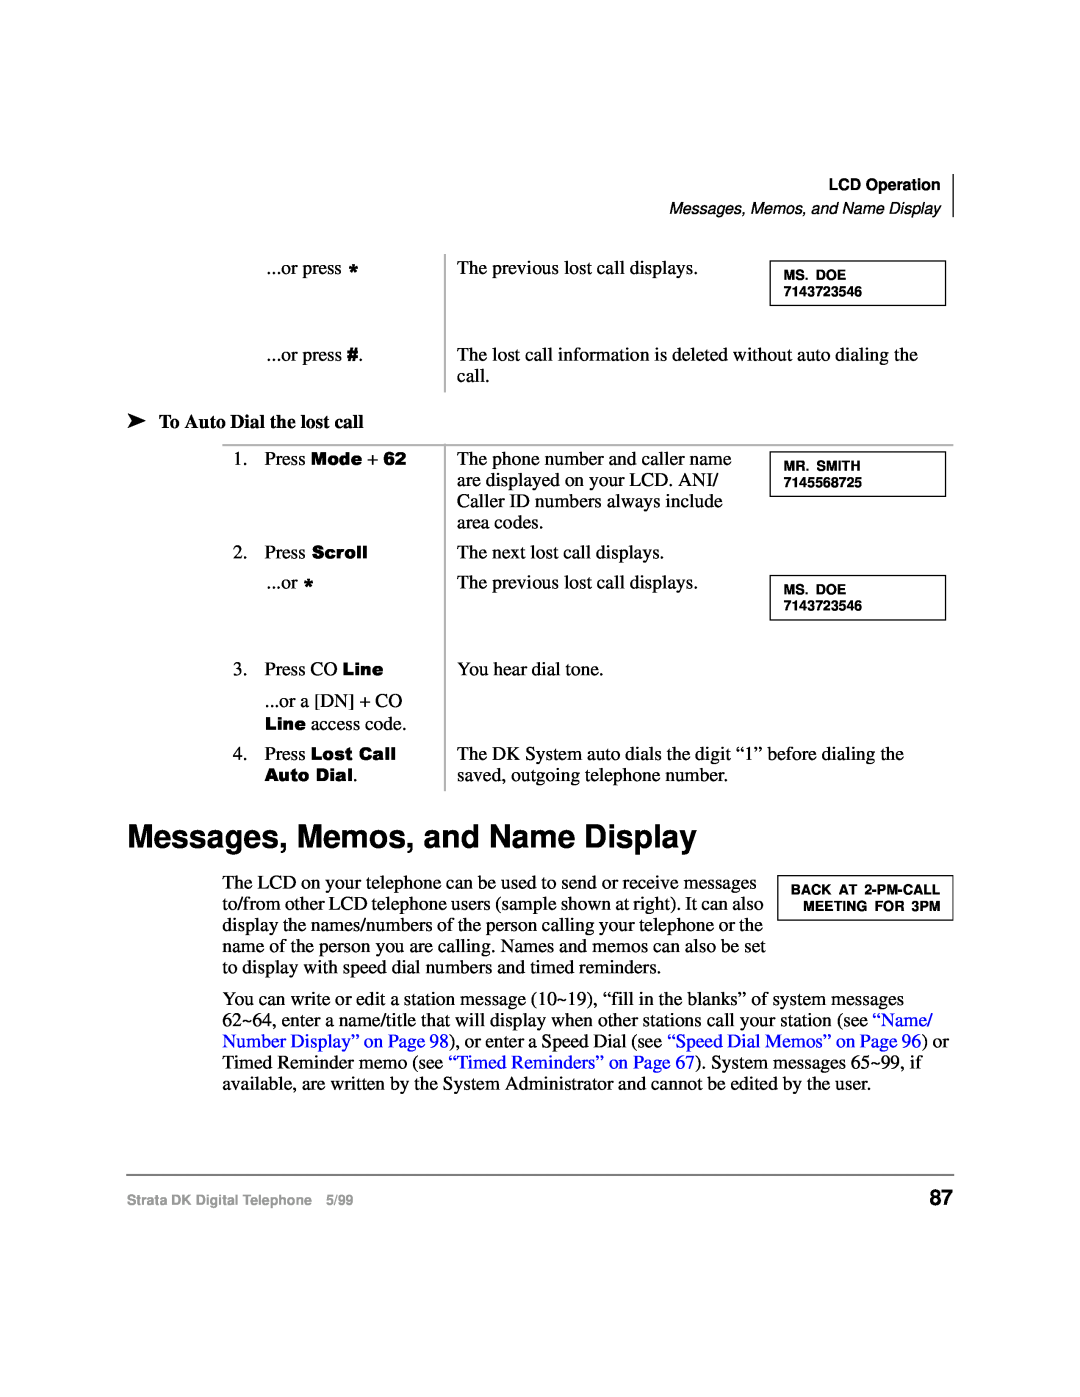 Toshiba CT manual Messages, Memos, and Name Display, To Auto Dial the lost call, The previous lost call displays 